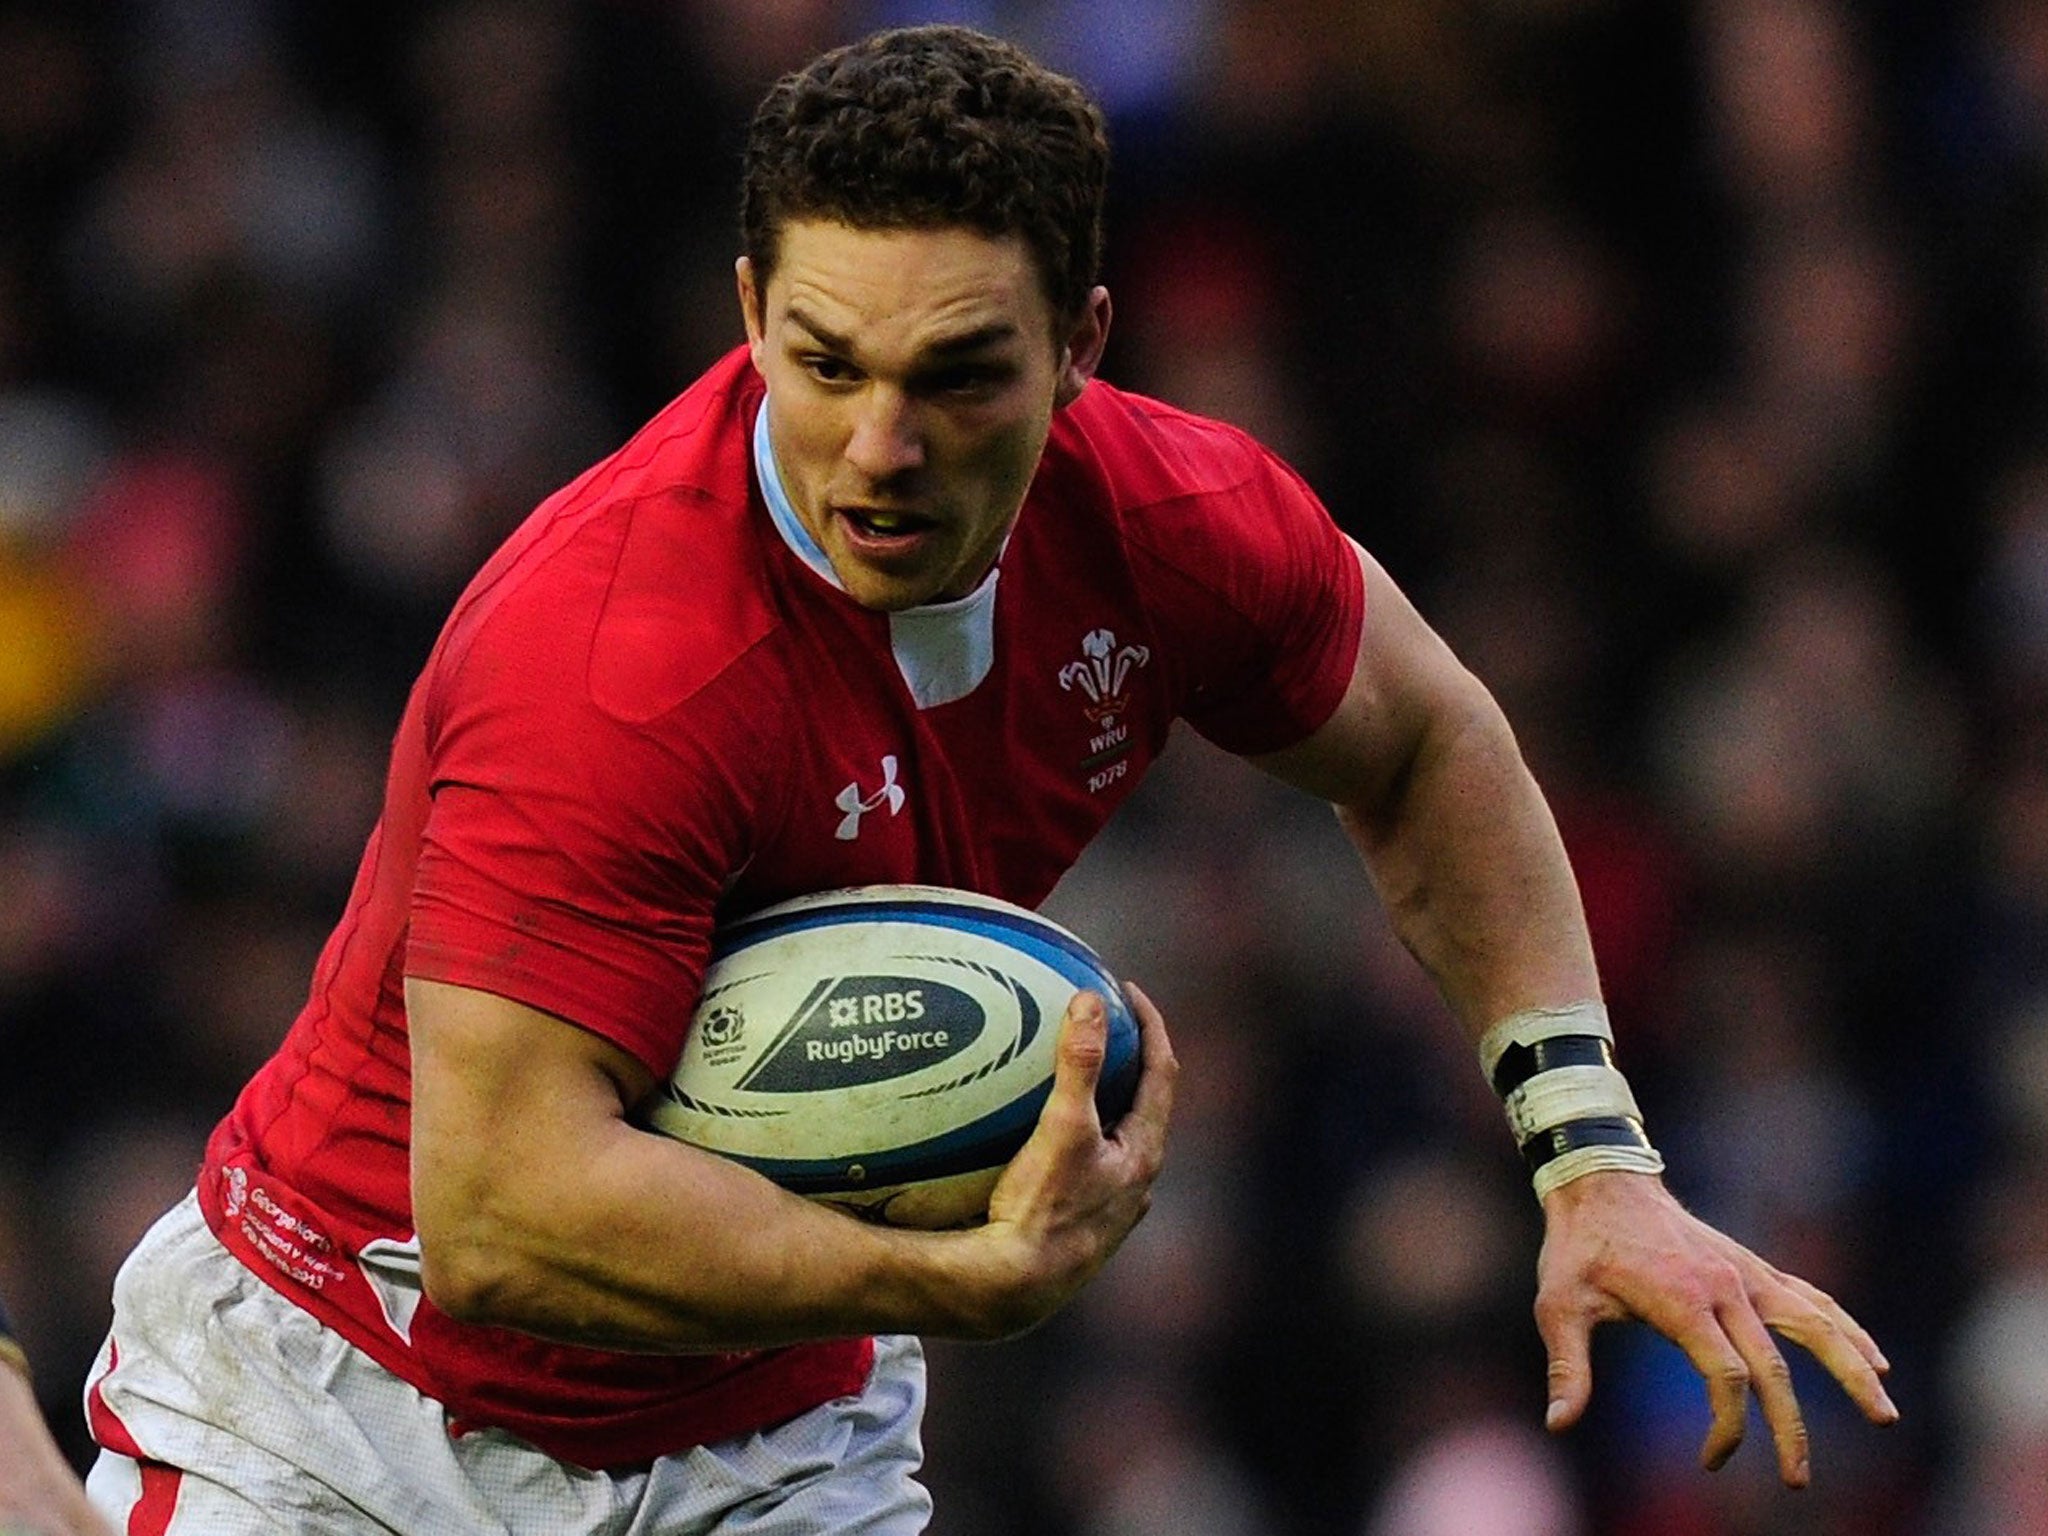 George North: 'Every time we play England it seems everyone wants to see a bloodbath'